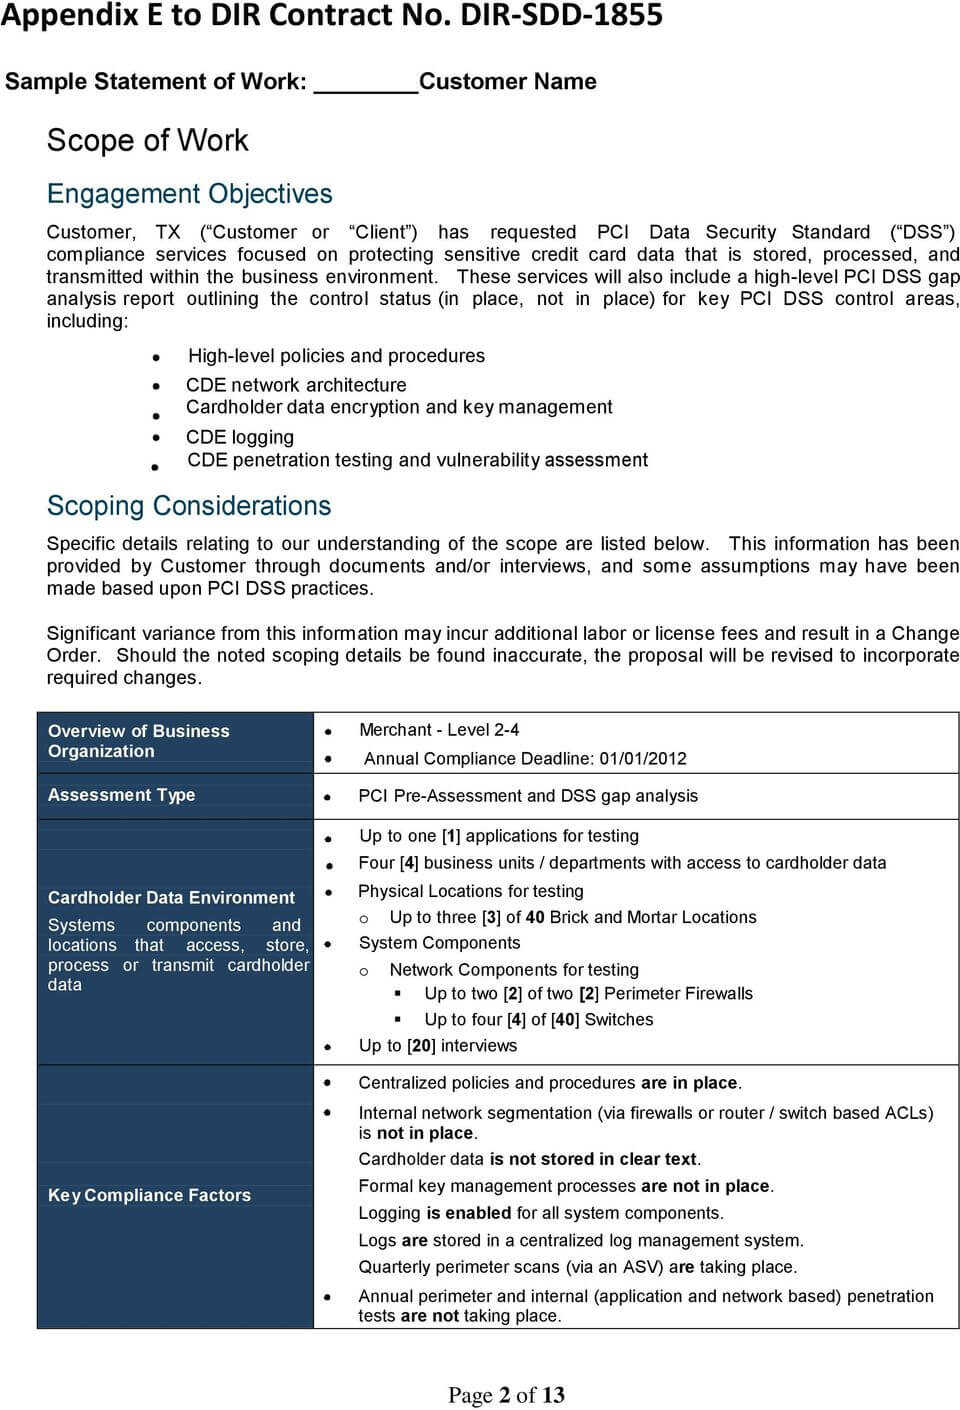 Sample Statement Of Work - Pdf Throughout Pci Dss Gap Analysis Report Template